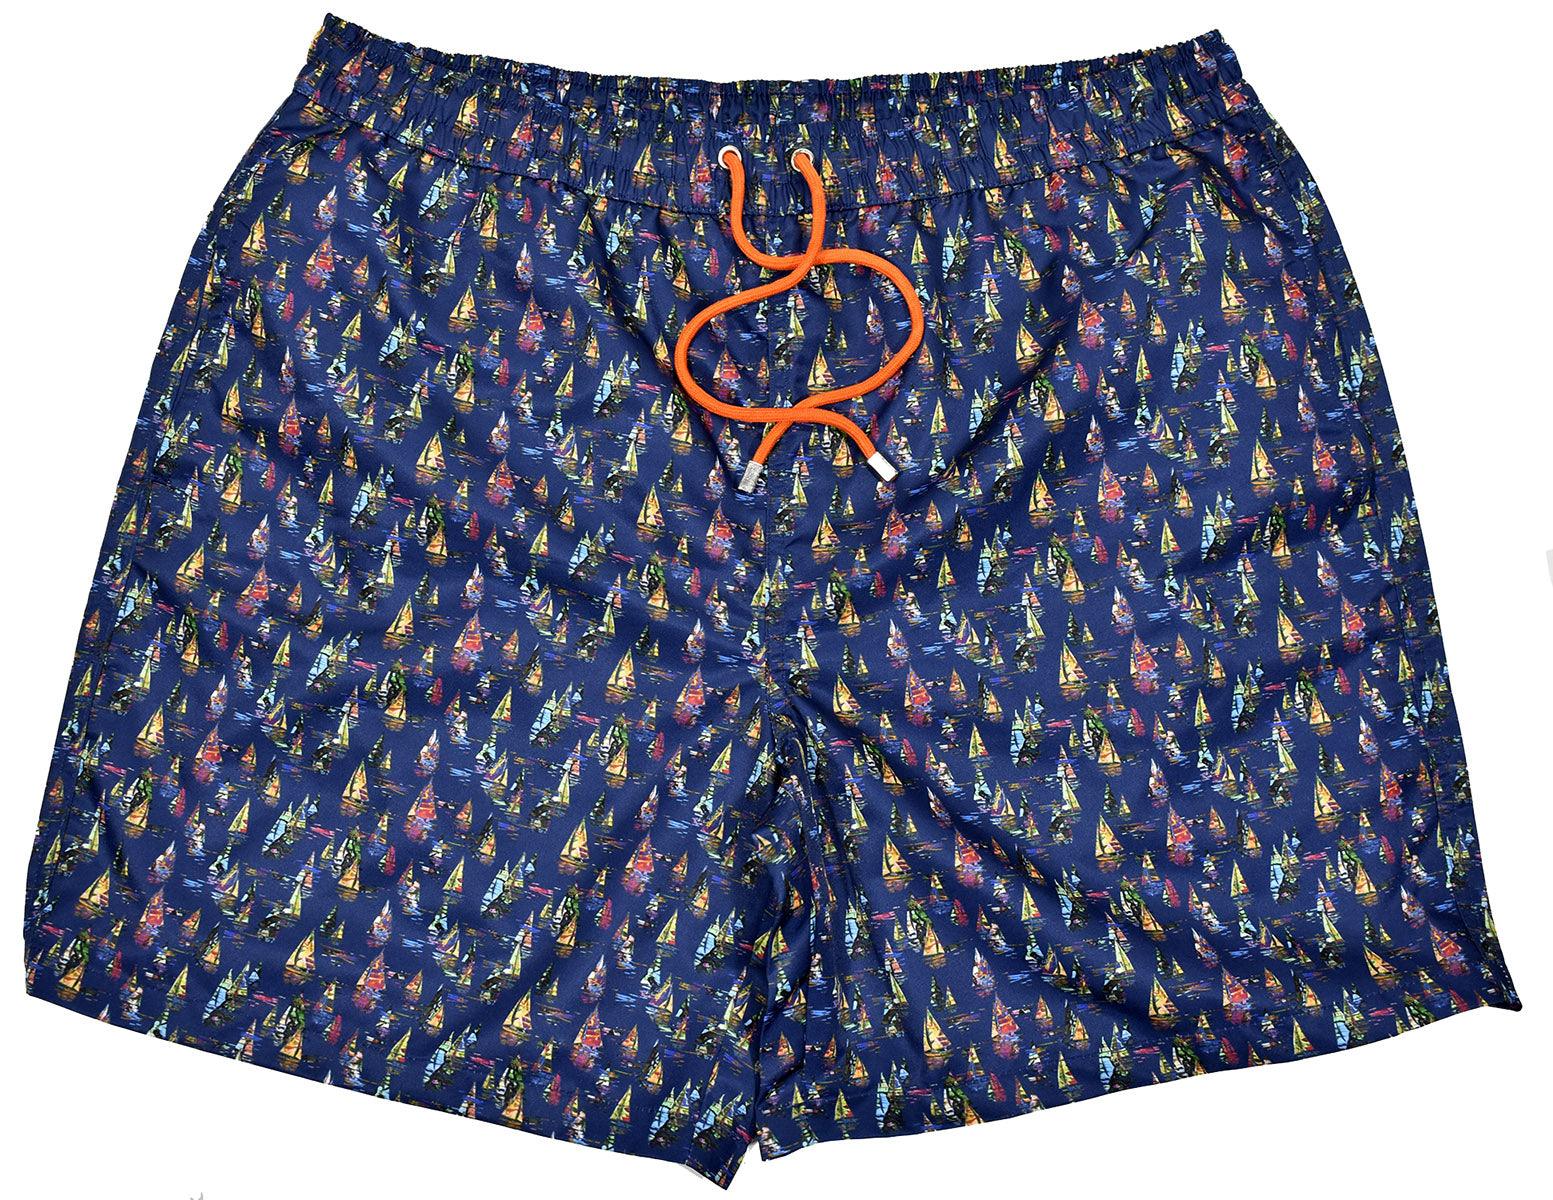 Our cool microfiber fabric swim shorts feature a unique pattern sure to set your image at the pool or beach.  Classic quick dry fabric. Elastic stretch waist band with fashion draw strings. Side slash pockets and back pocket. Mesh lining. Modern fit, order up one size if between sizes.  Sailing print swim suit, by Marcello Sport